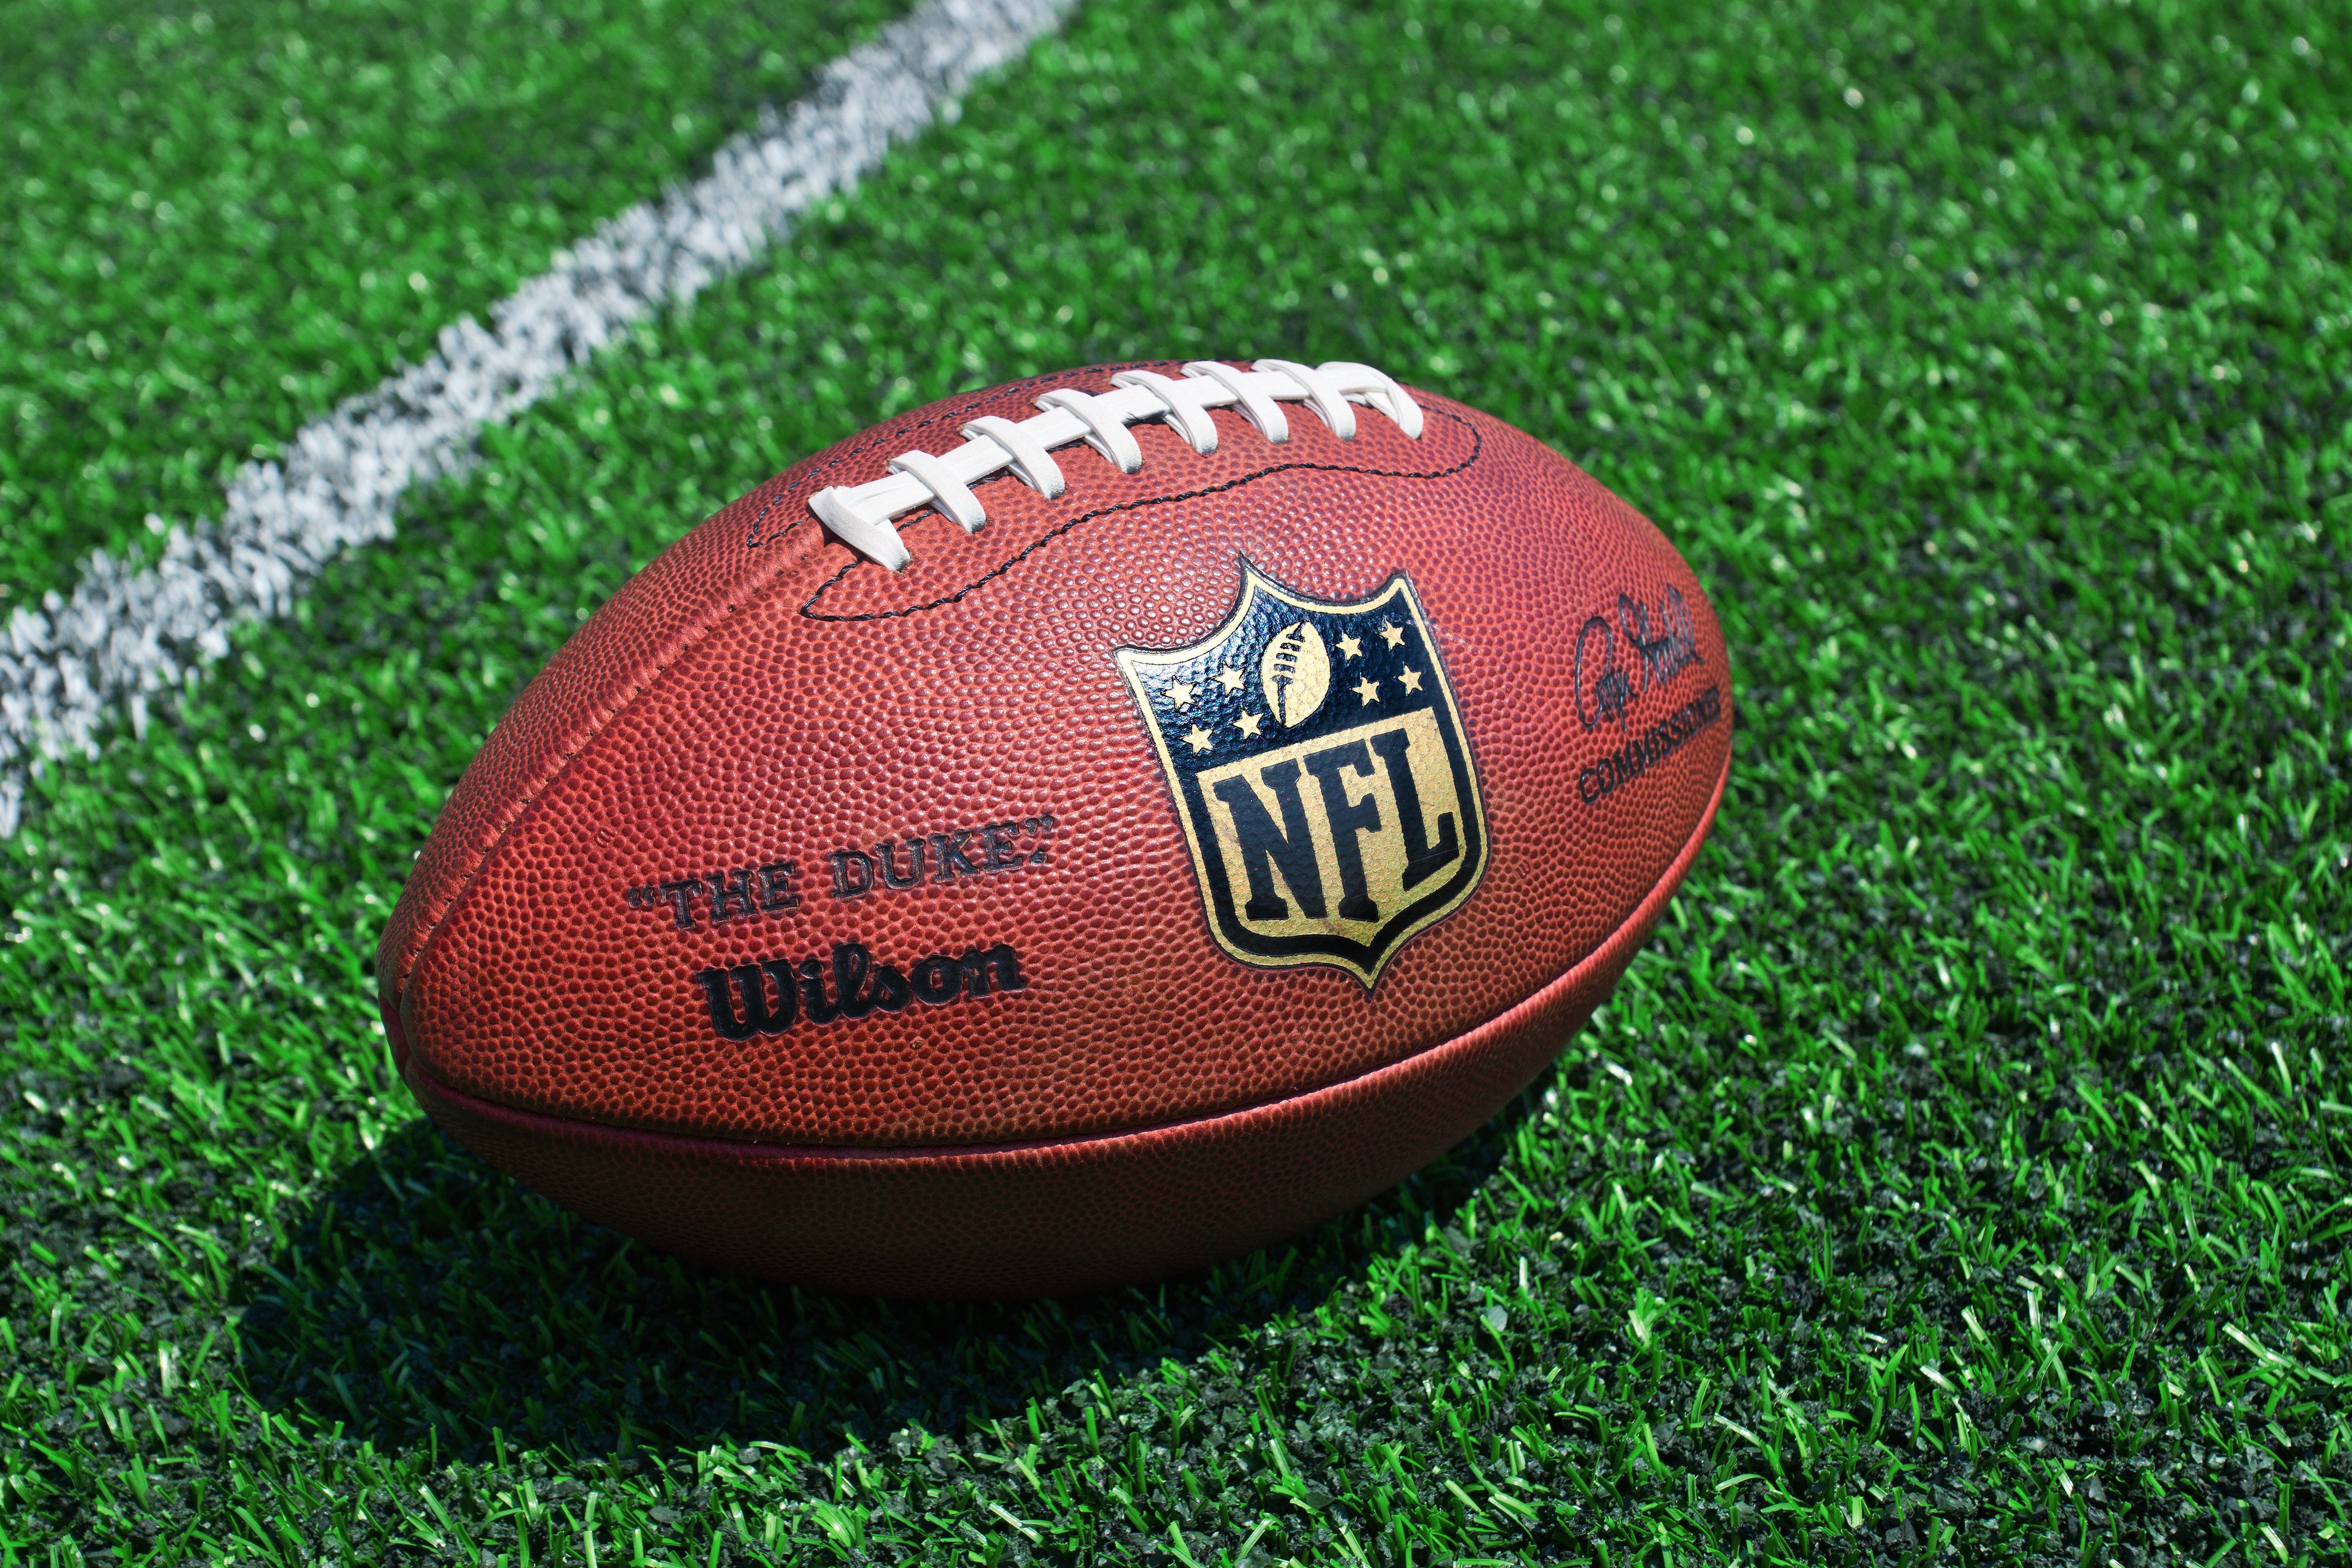 Photo of official NFL football on field.|Source: Shutterstock